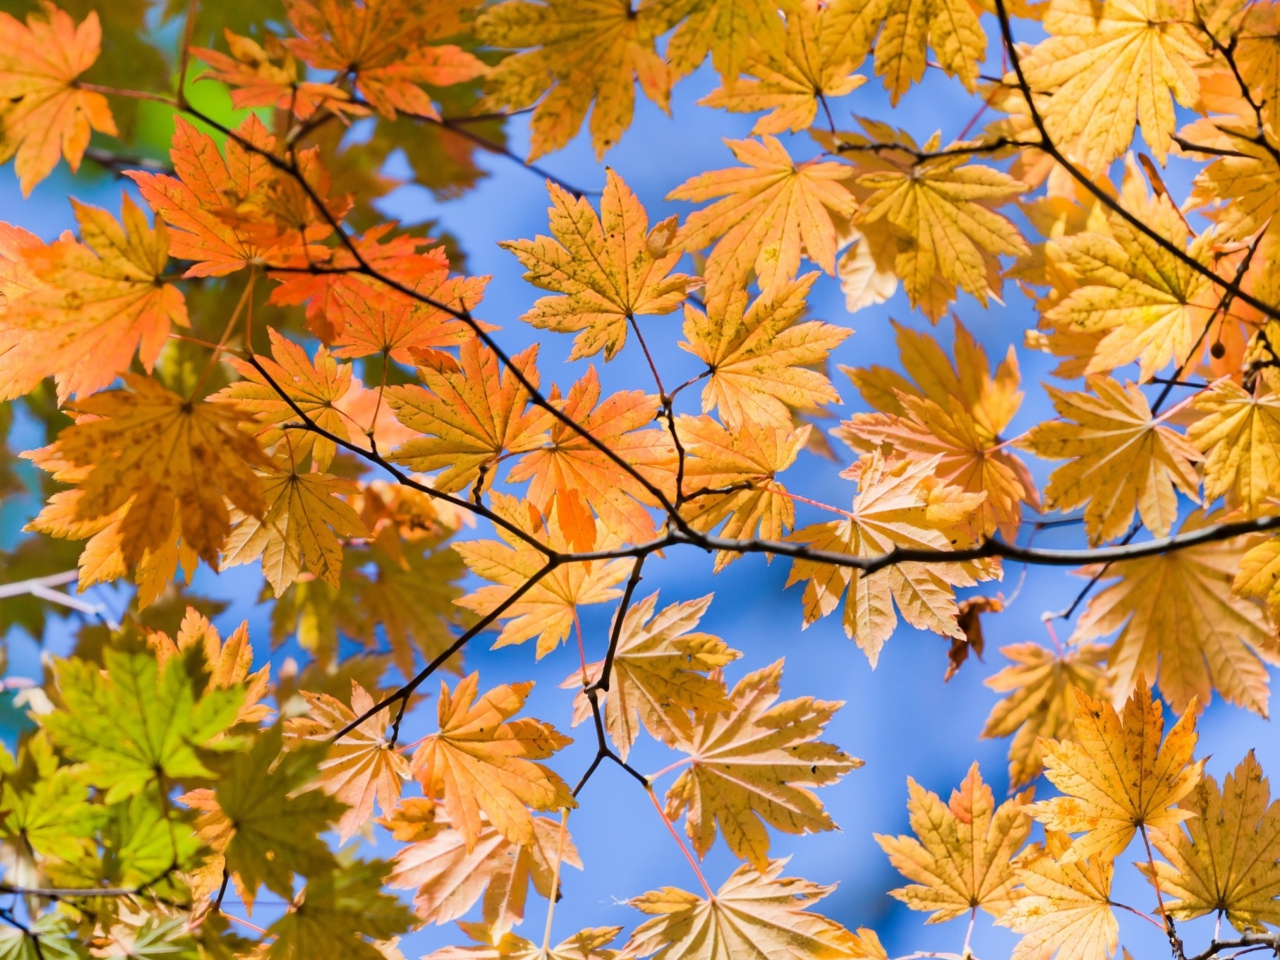 Autumn Leaves And Blue Sky wallpaper 1280x960